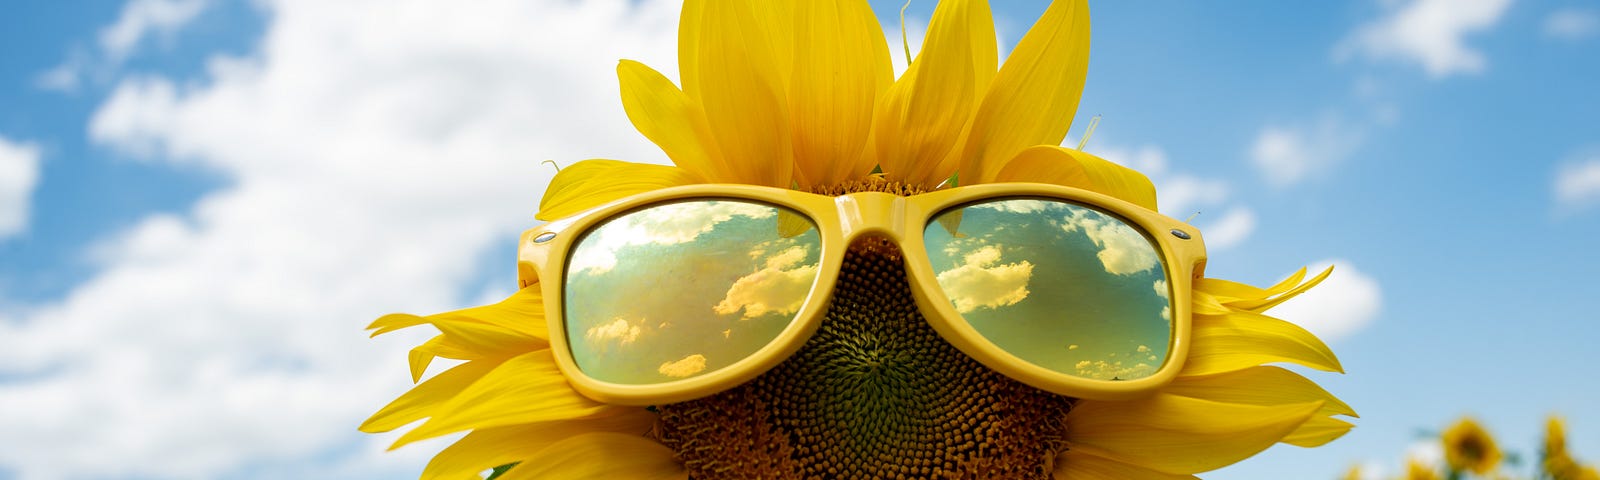 Sunflowers wearing sunglasses against a blue sky.